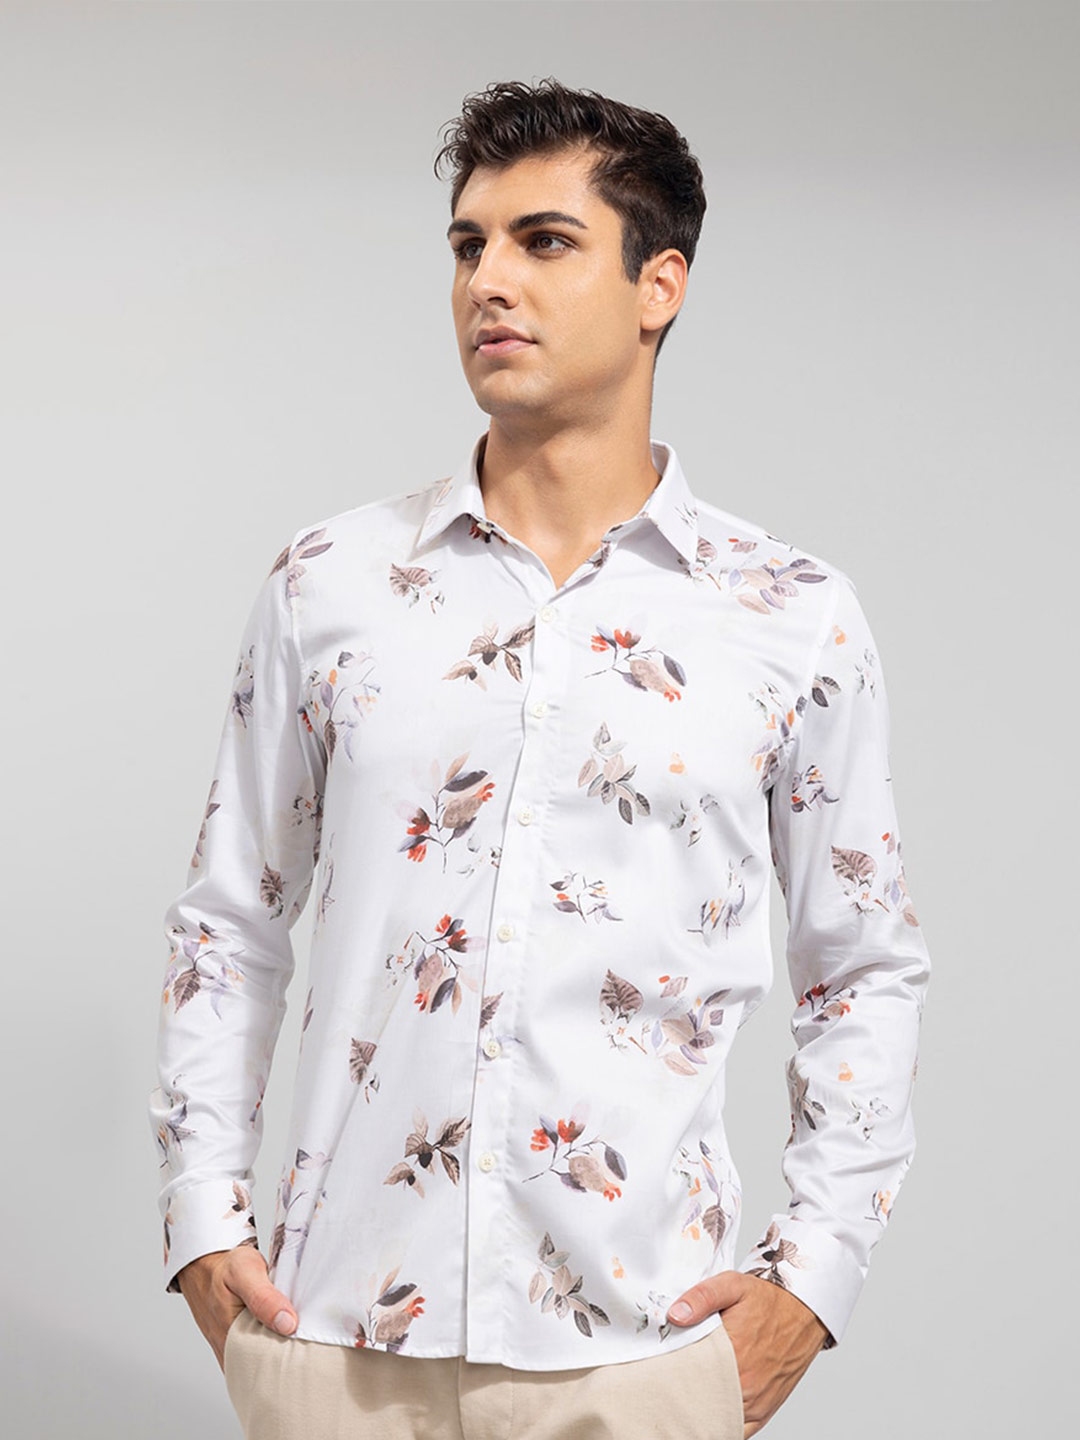 Buy Snitch Men White And Beige Floral Printed Cotton Slim Fit Casual Shirt Shirts For Men